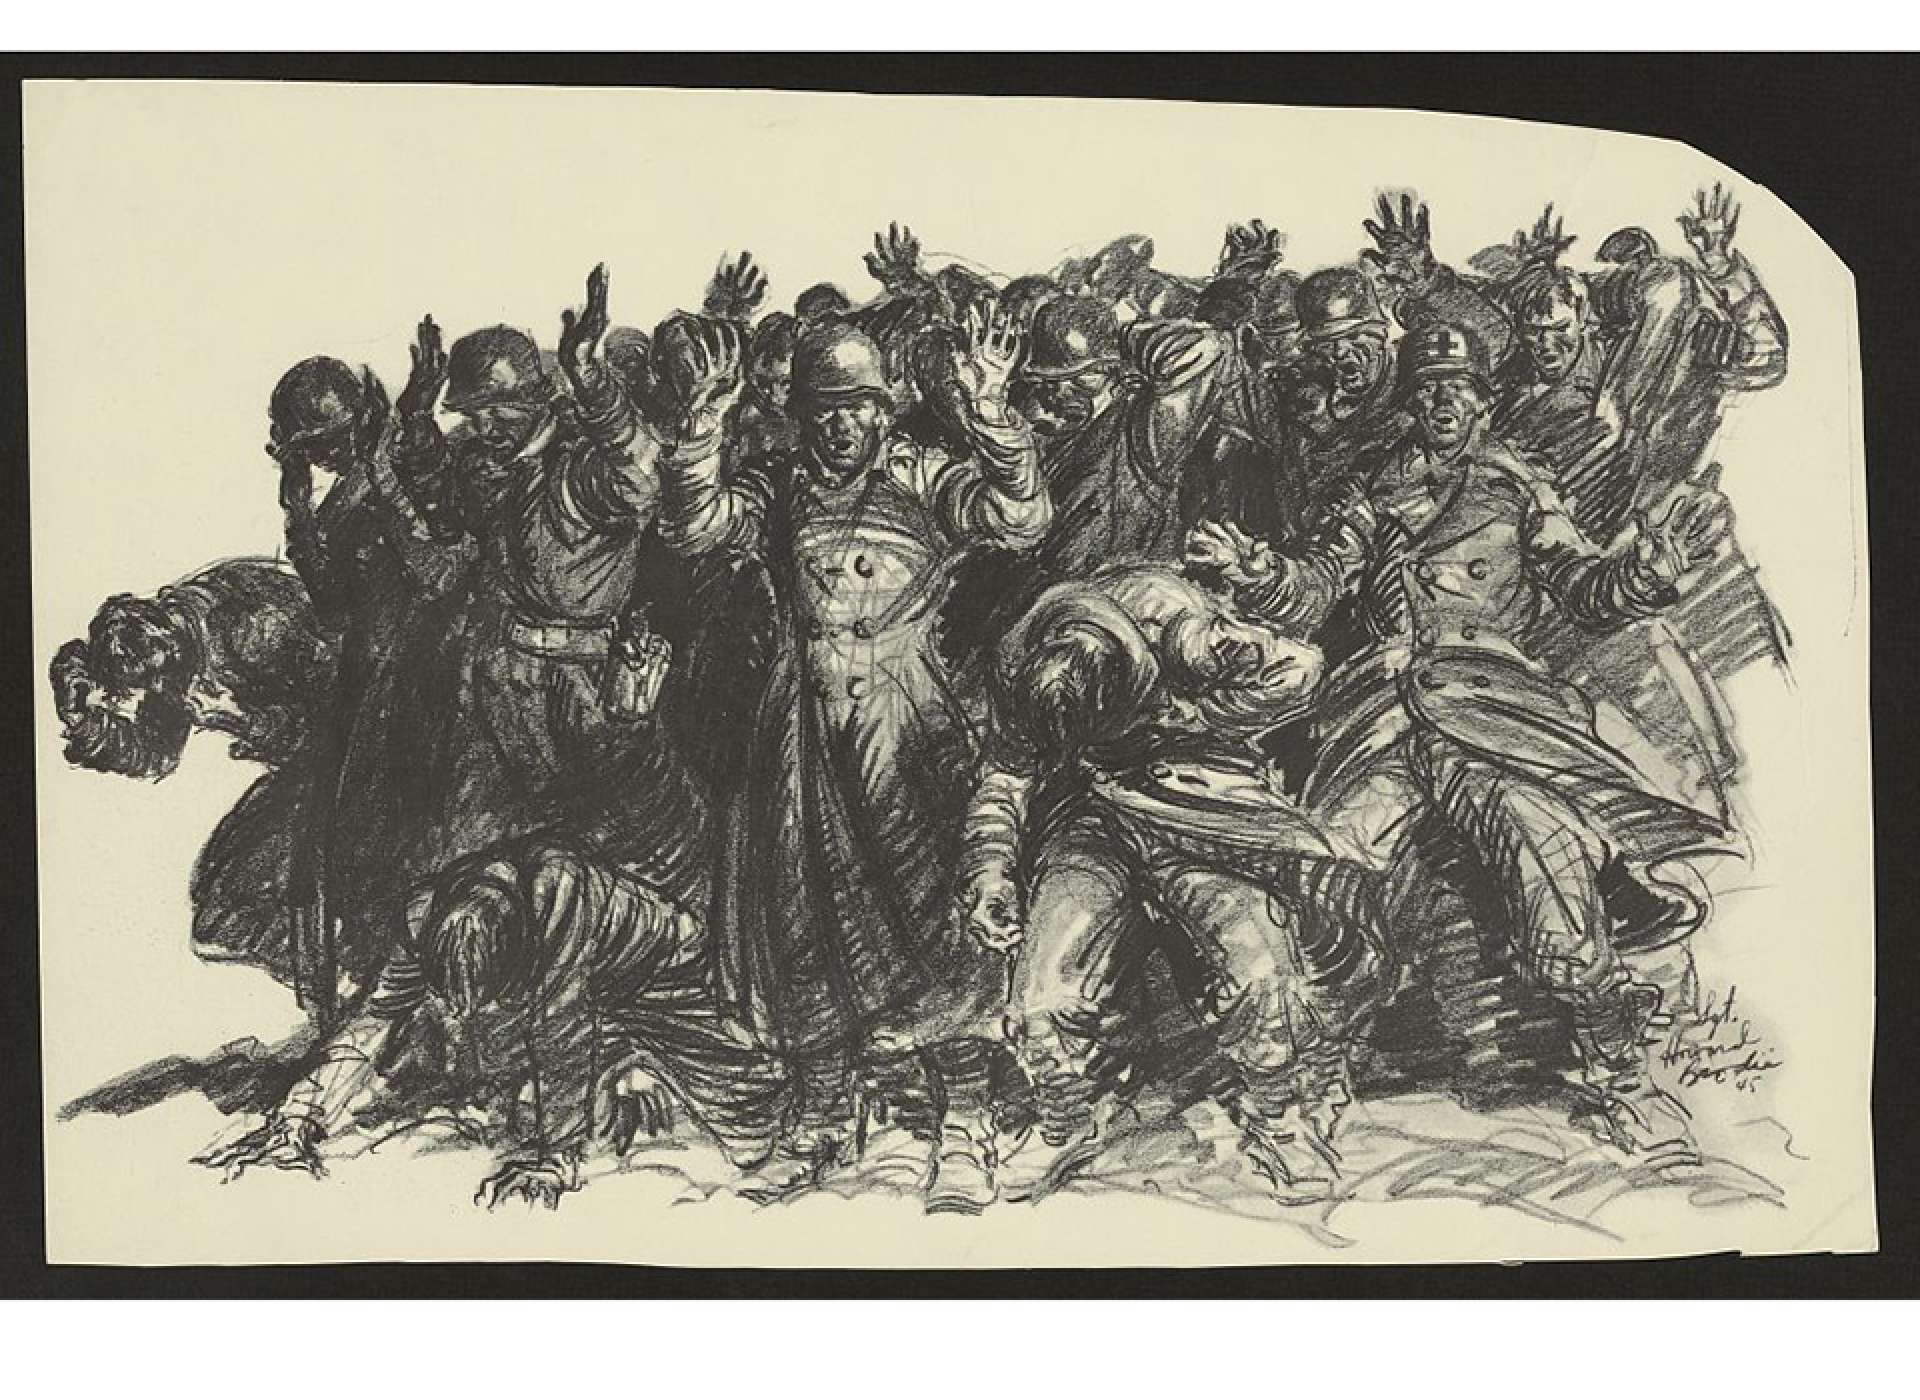 Image by Sgt. Howard Brodie of the last moments before the Malmedy Massacre, based on survivors&#039; accounts. Library of Congress Prints and Photographs Division.